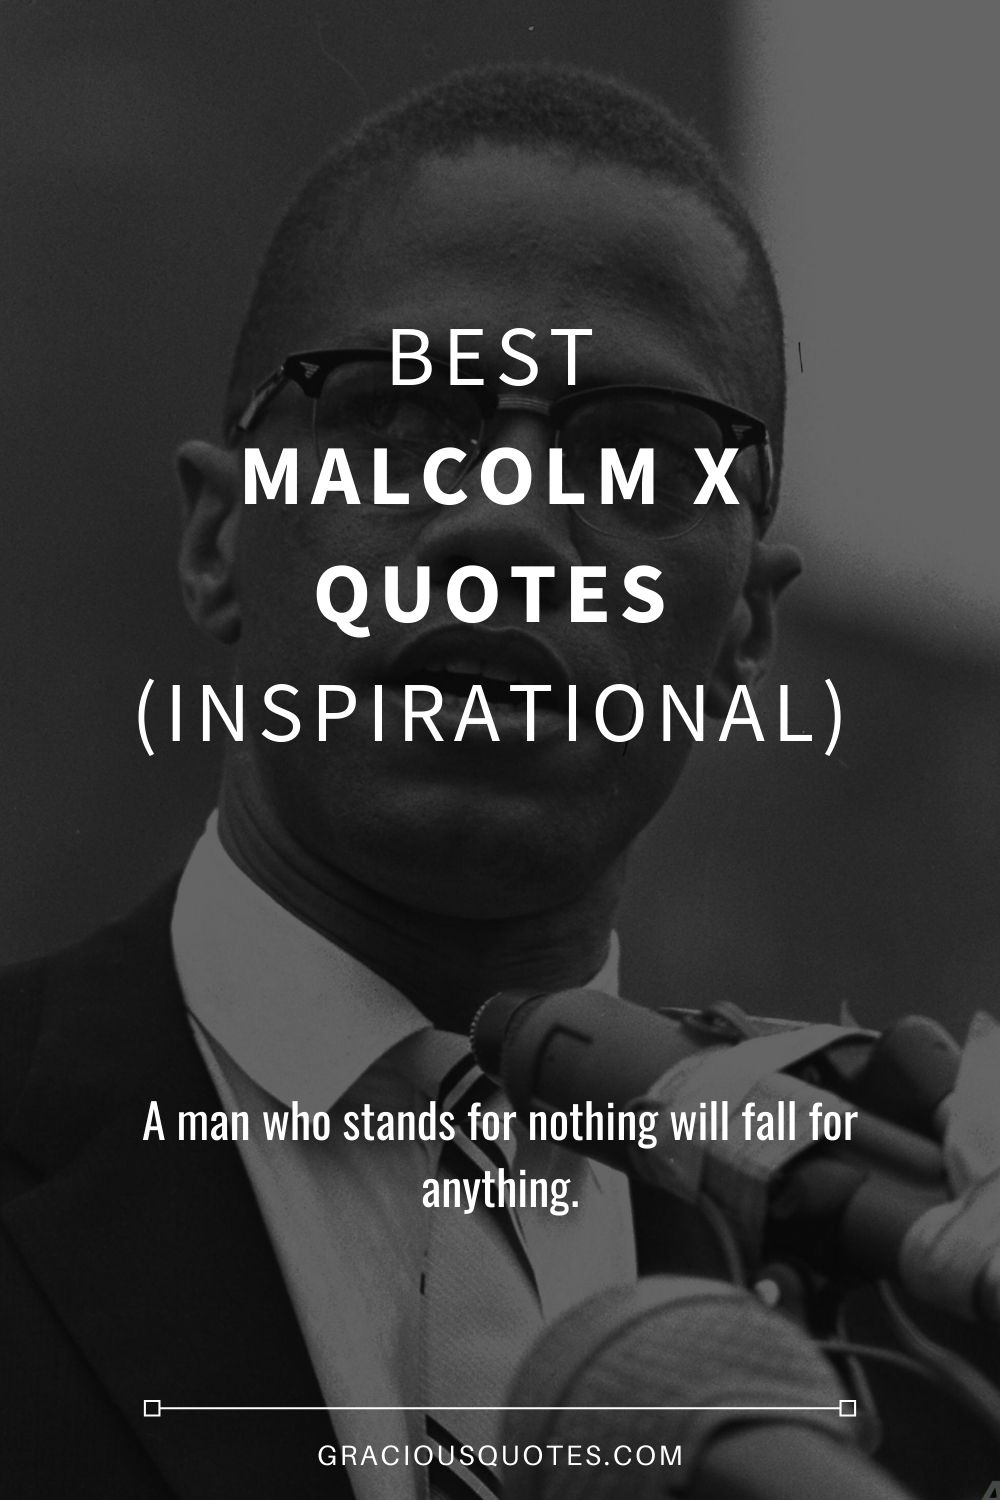 Best Malcolm X Quotes (INSPIRATIONAL) - Gracious Quotes